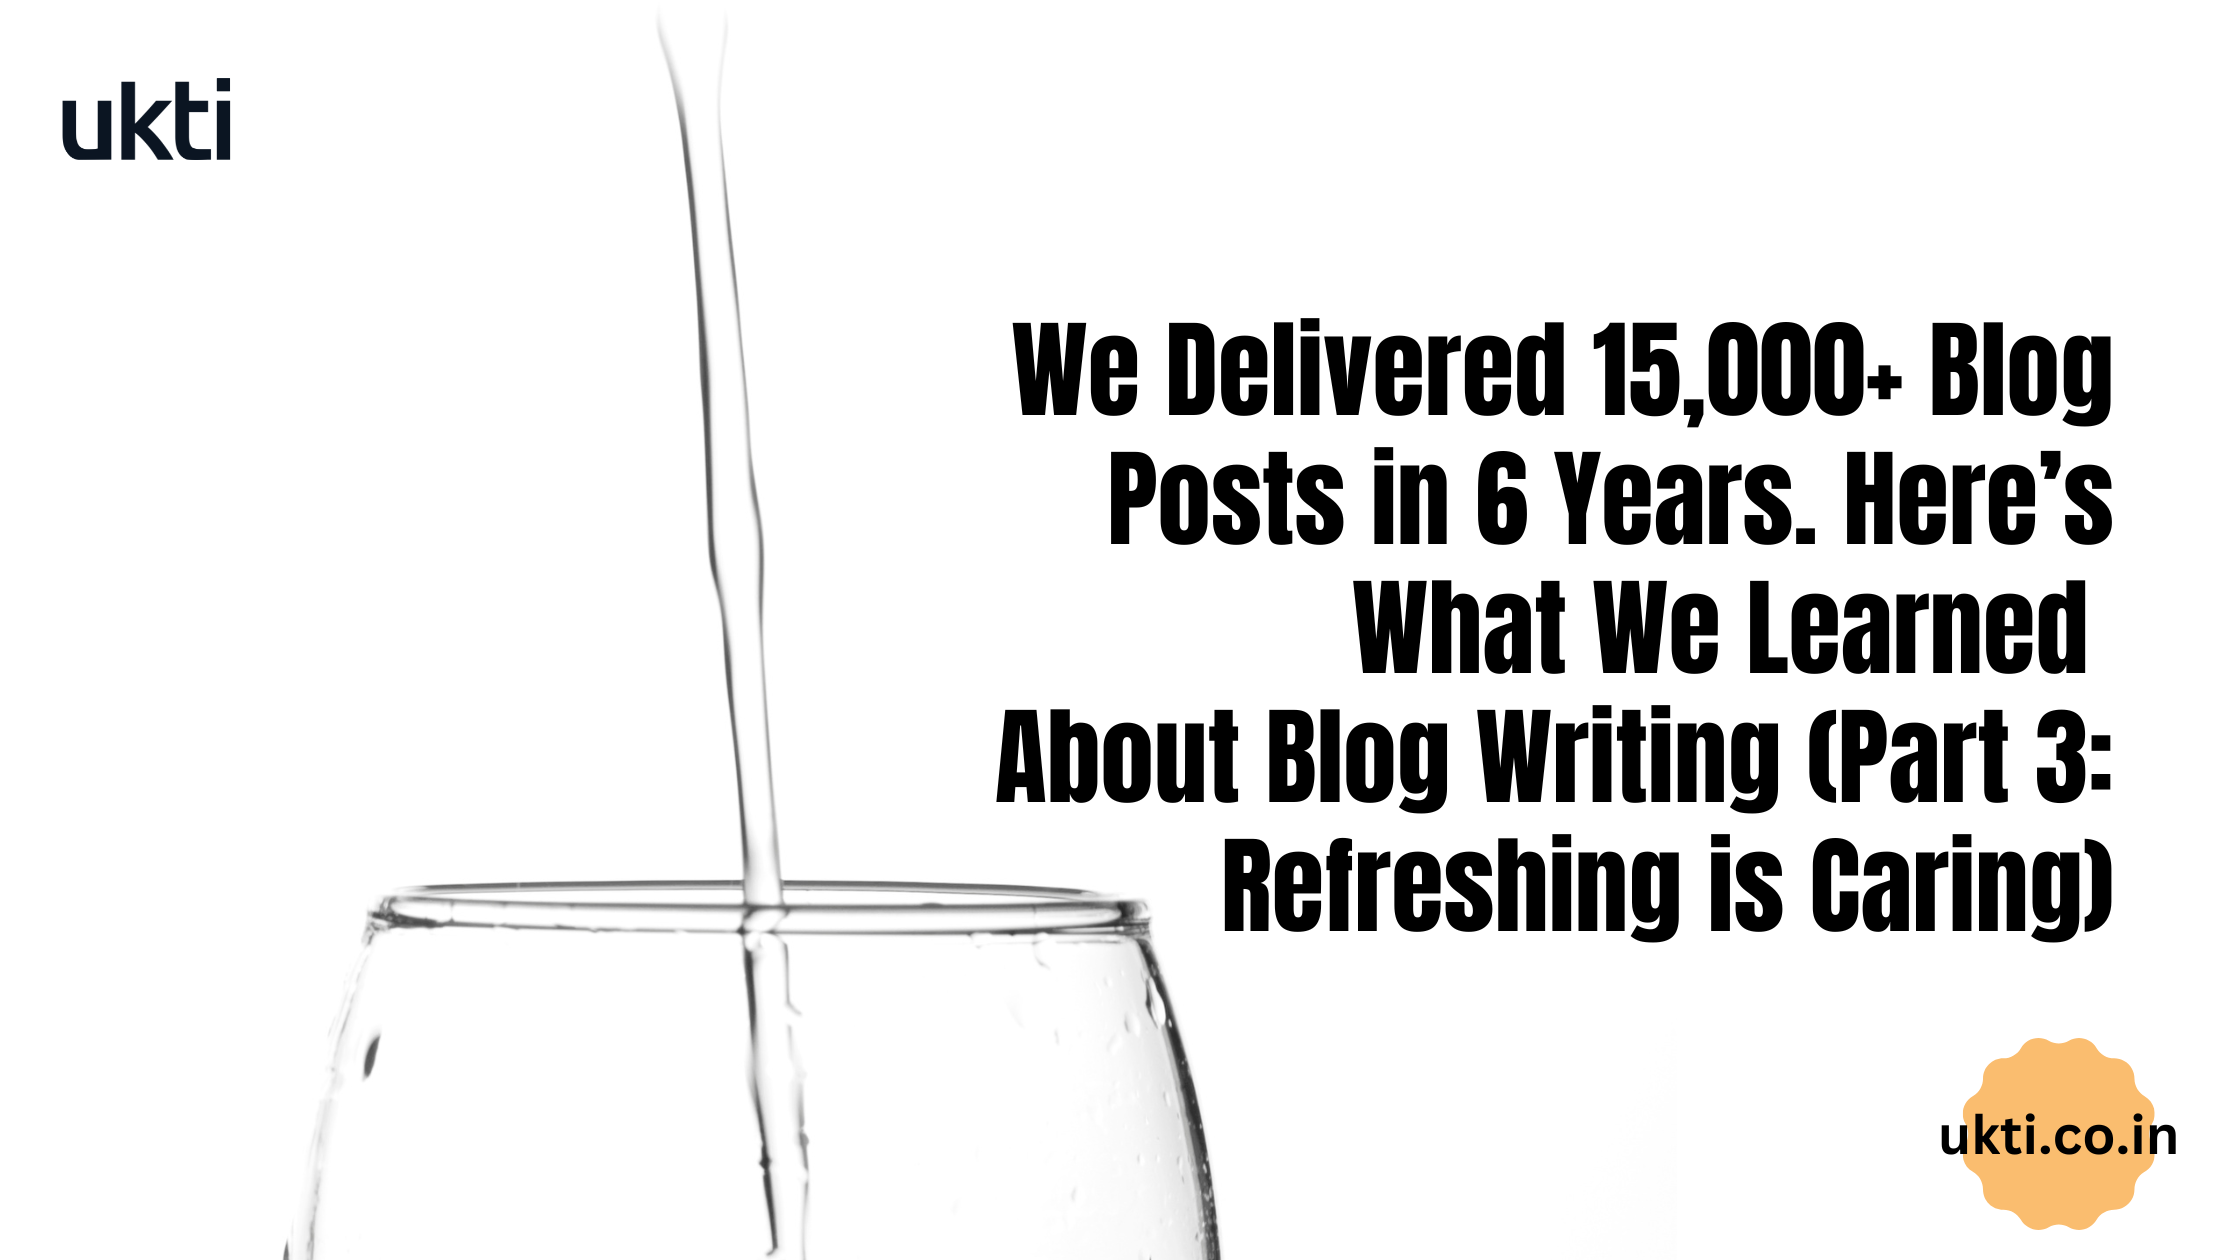 How refreshing content leads to better blog performance